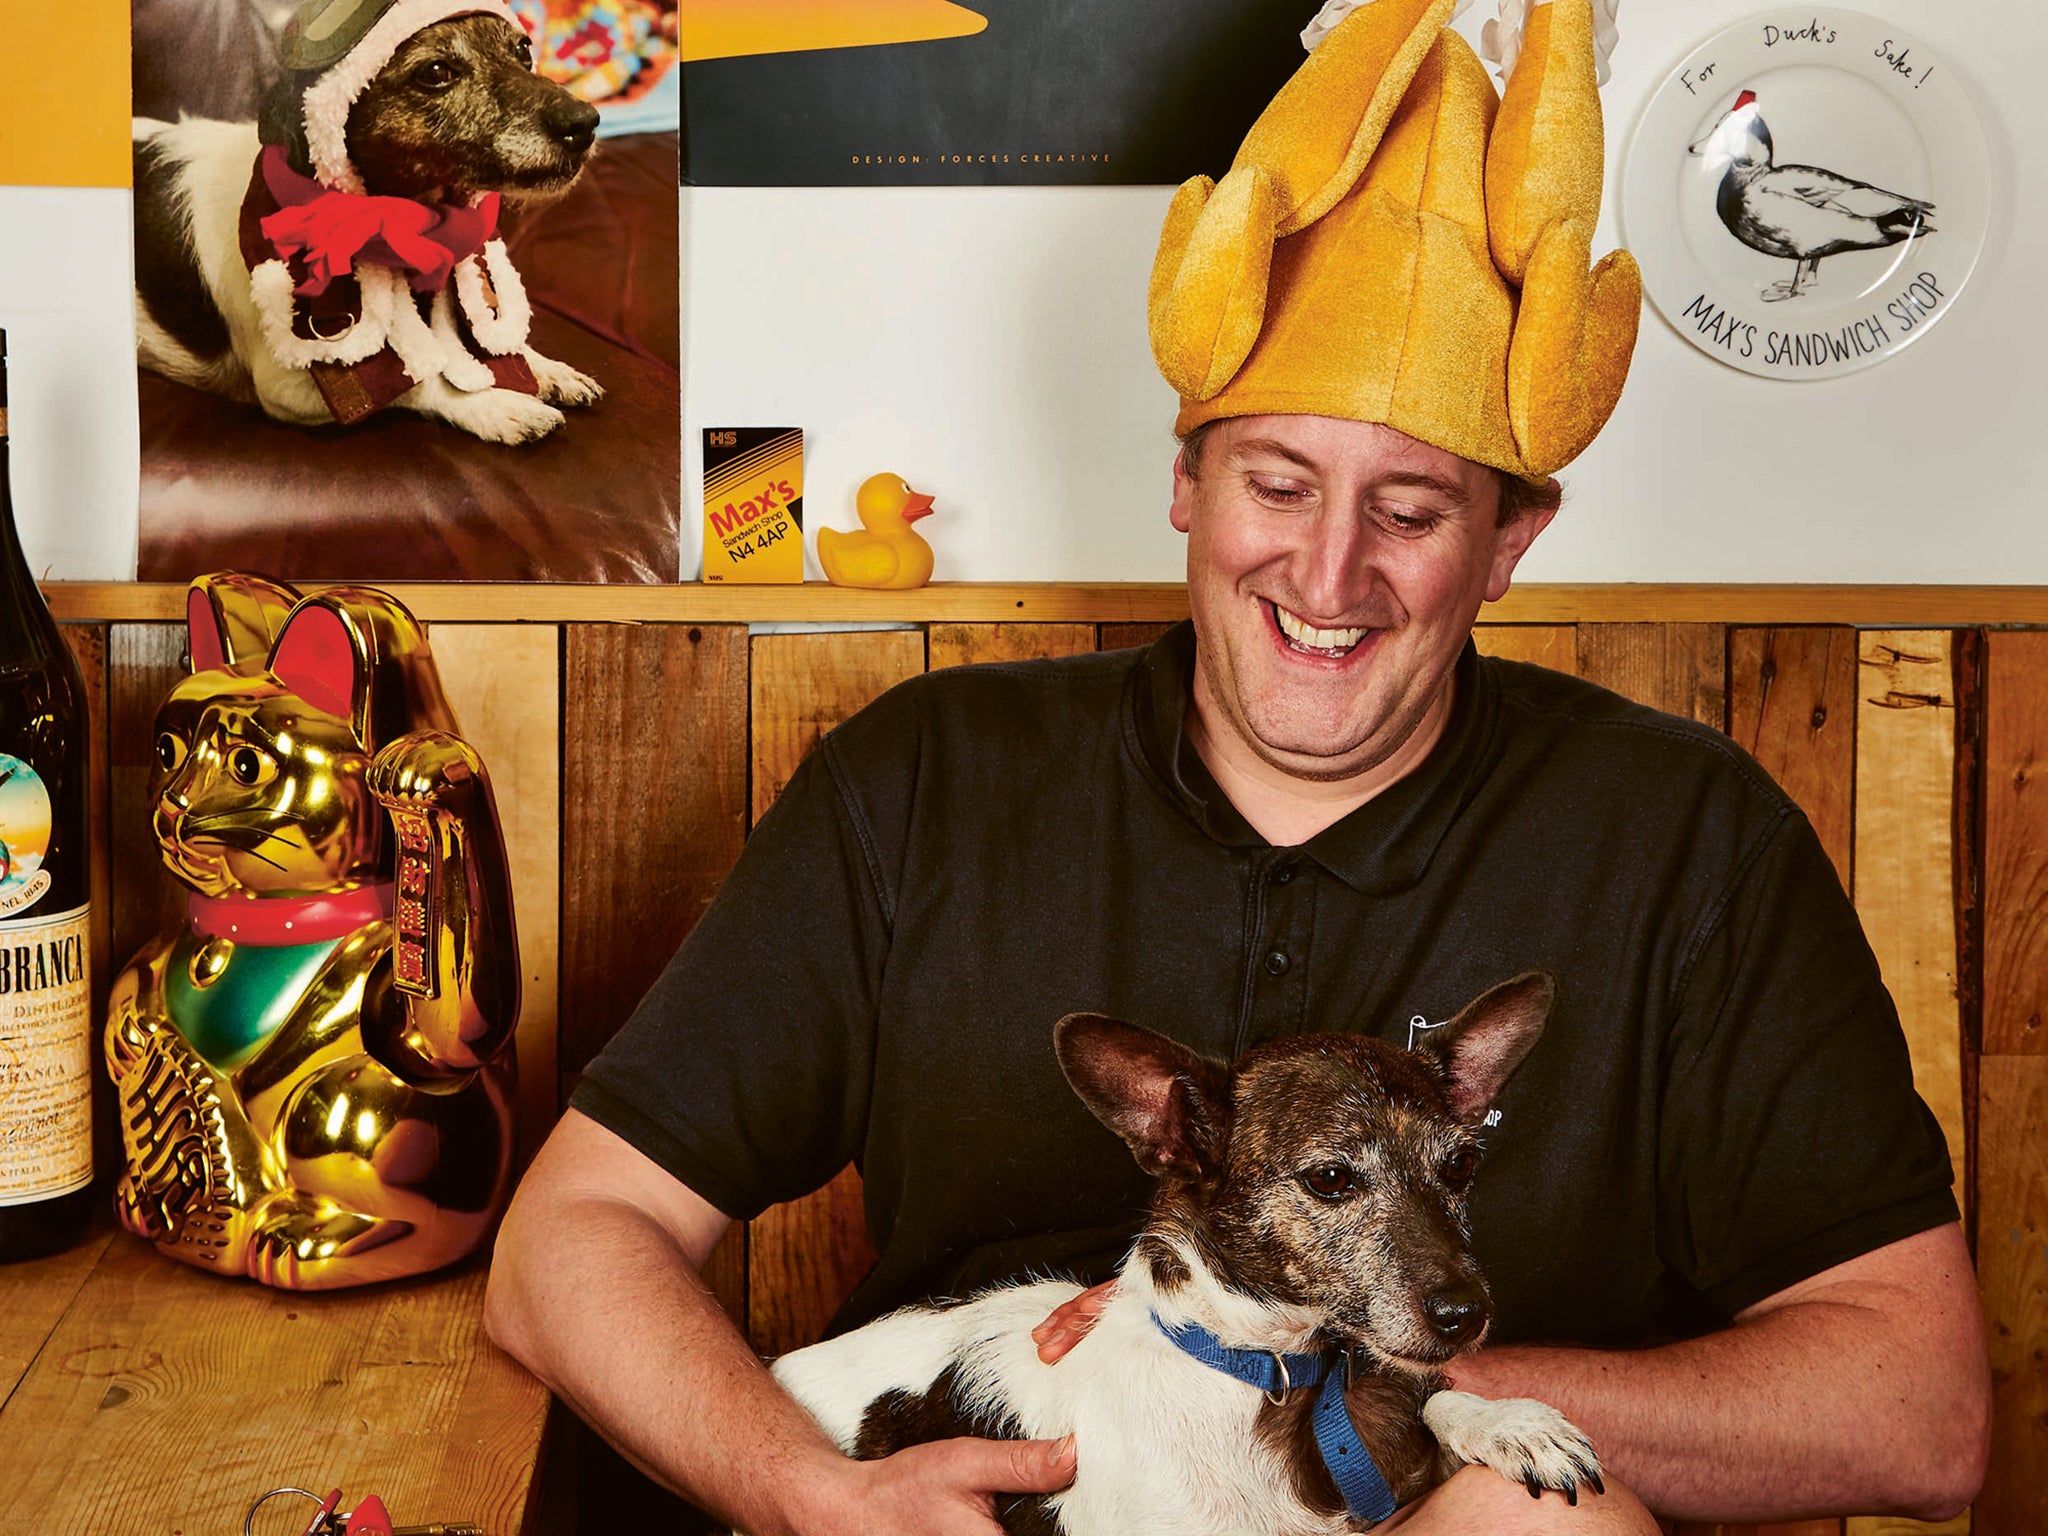 You might know Max from his eponymous hugely popular sandwich shop in north London